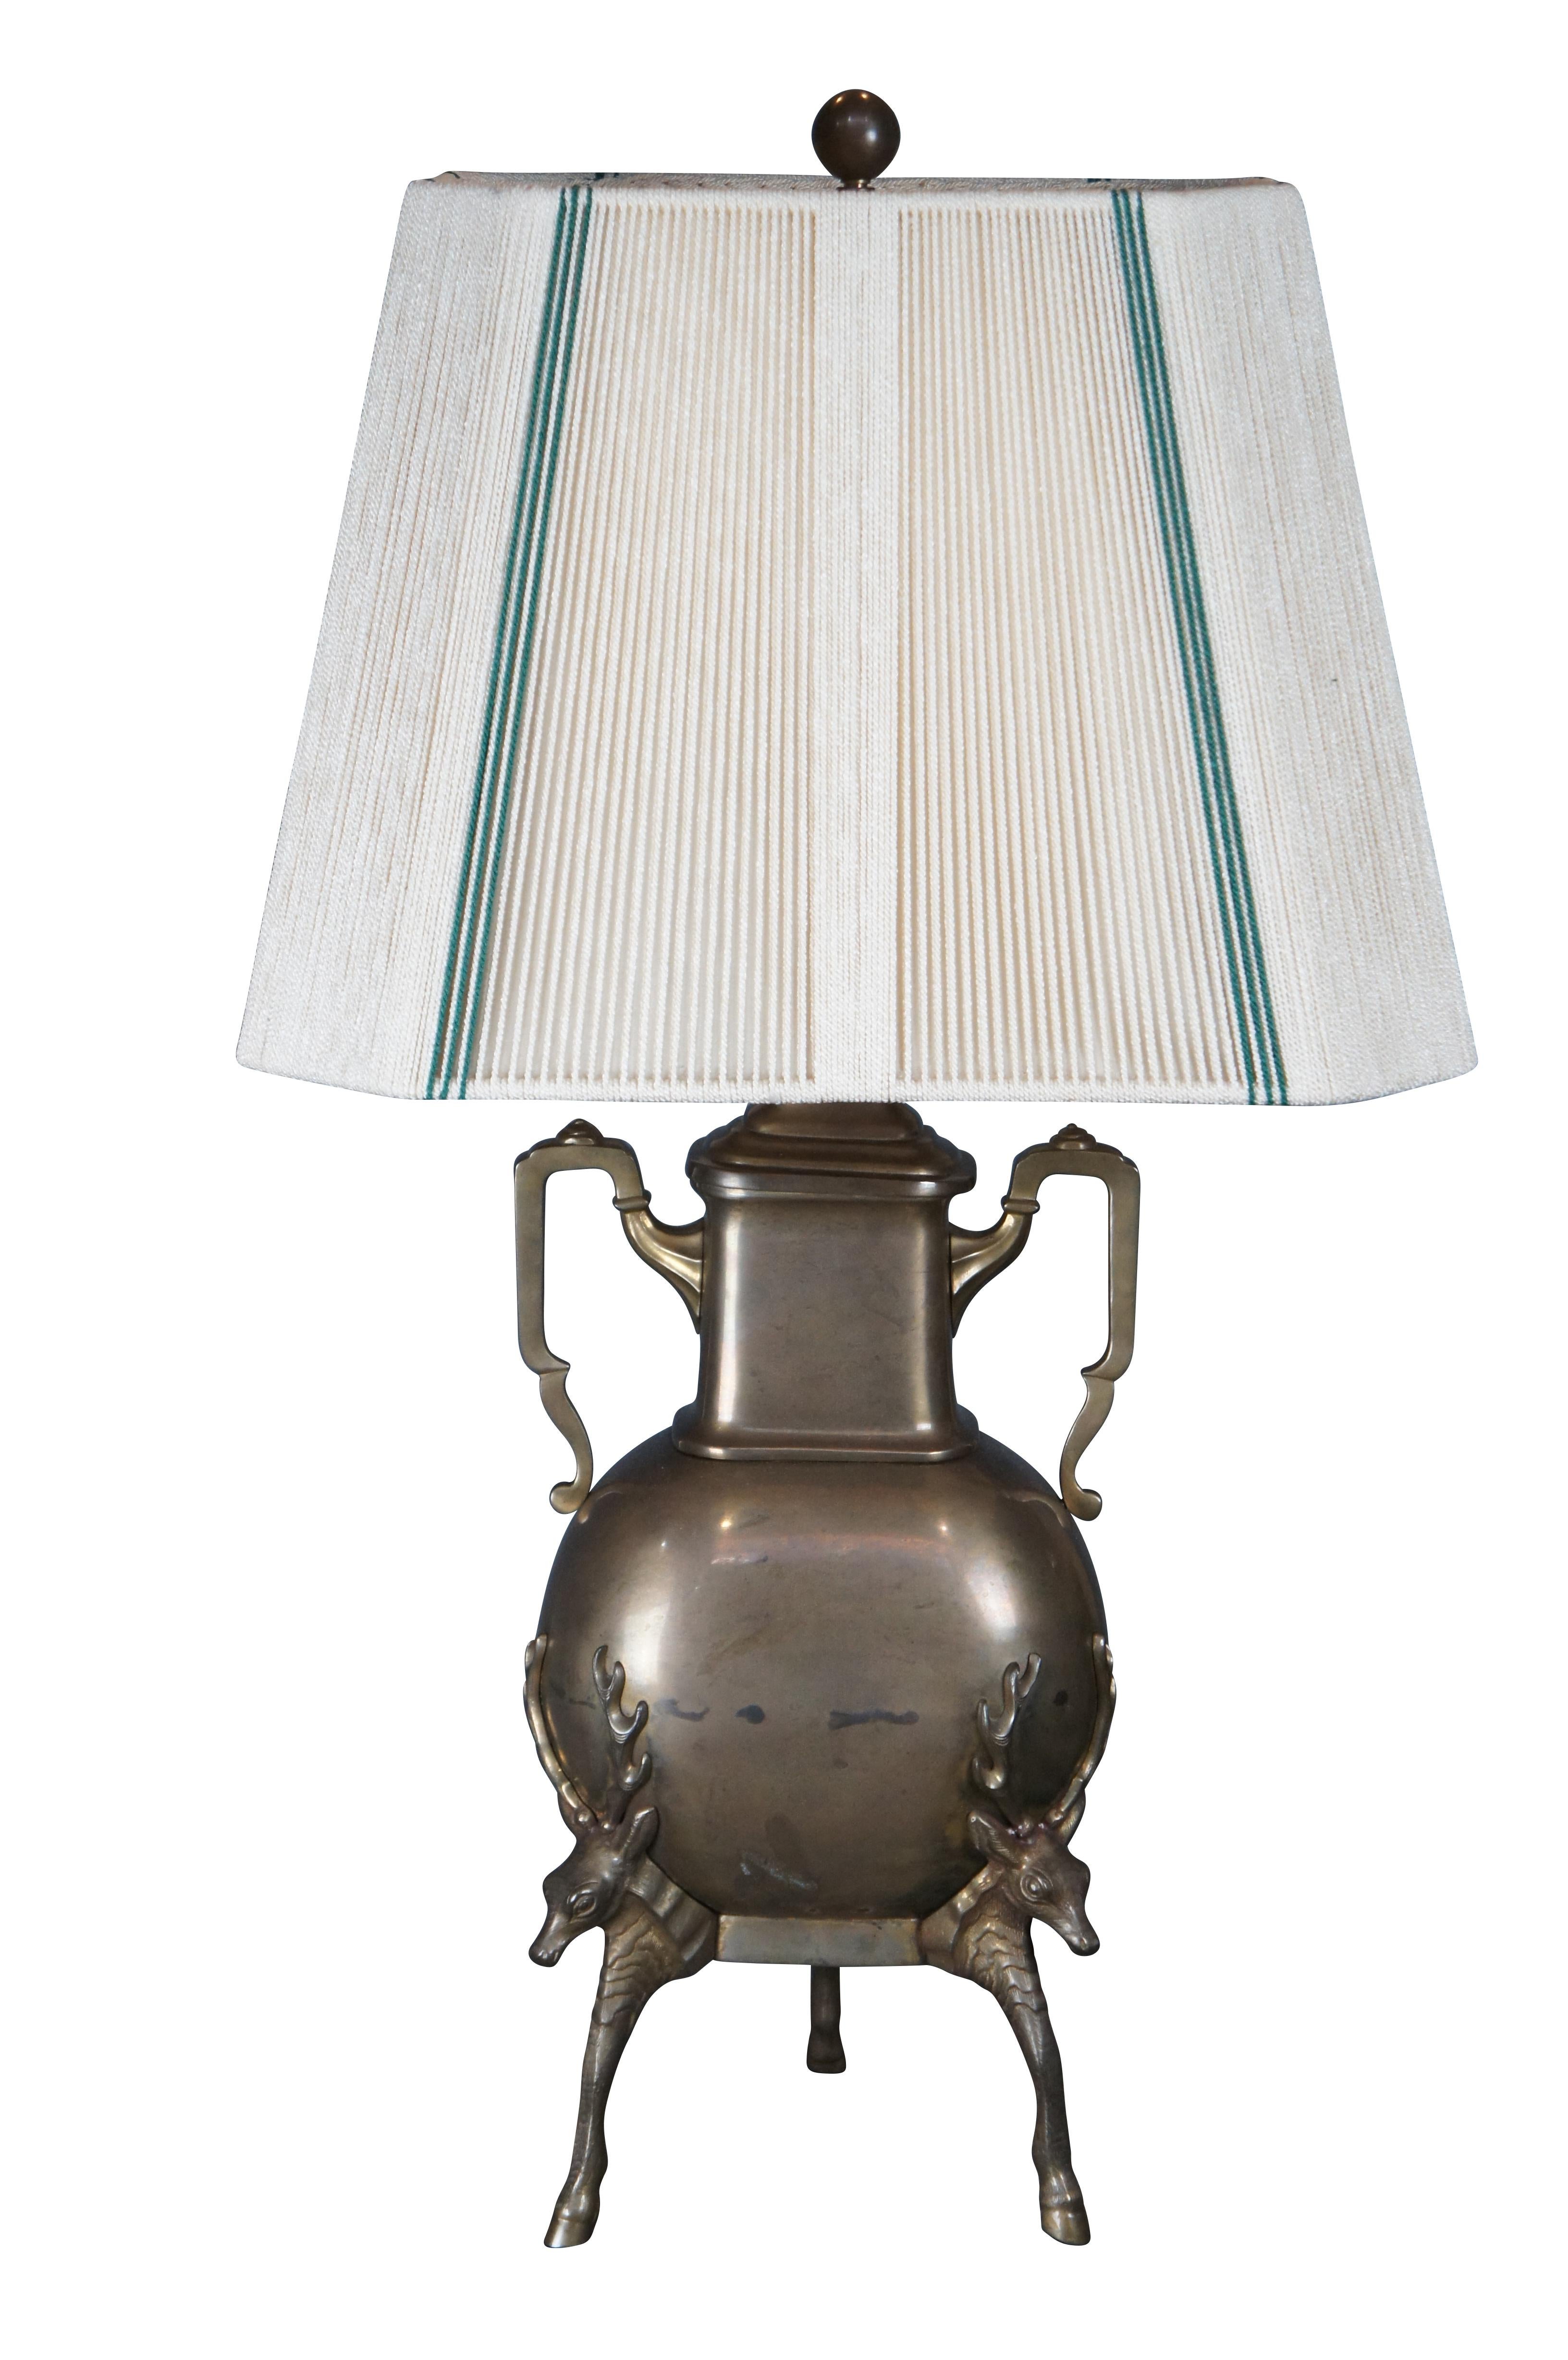 Chapman Industries brass urn shaped lamp with Stag / Elk tripod hoof footed base. Circa 1986. Includes an impressive green and white striped shade with cotton woven strings.

Dimensions:
13